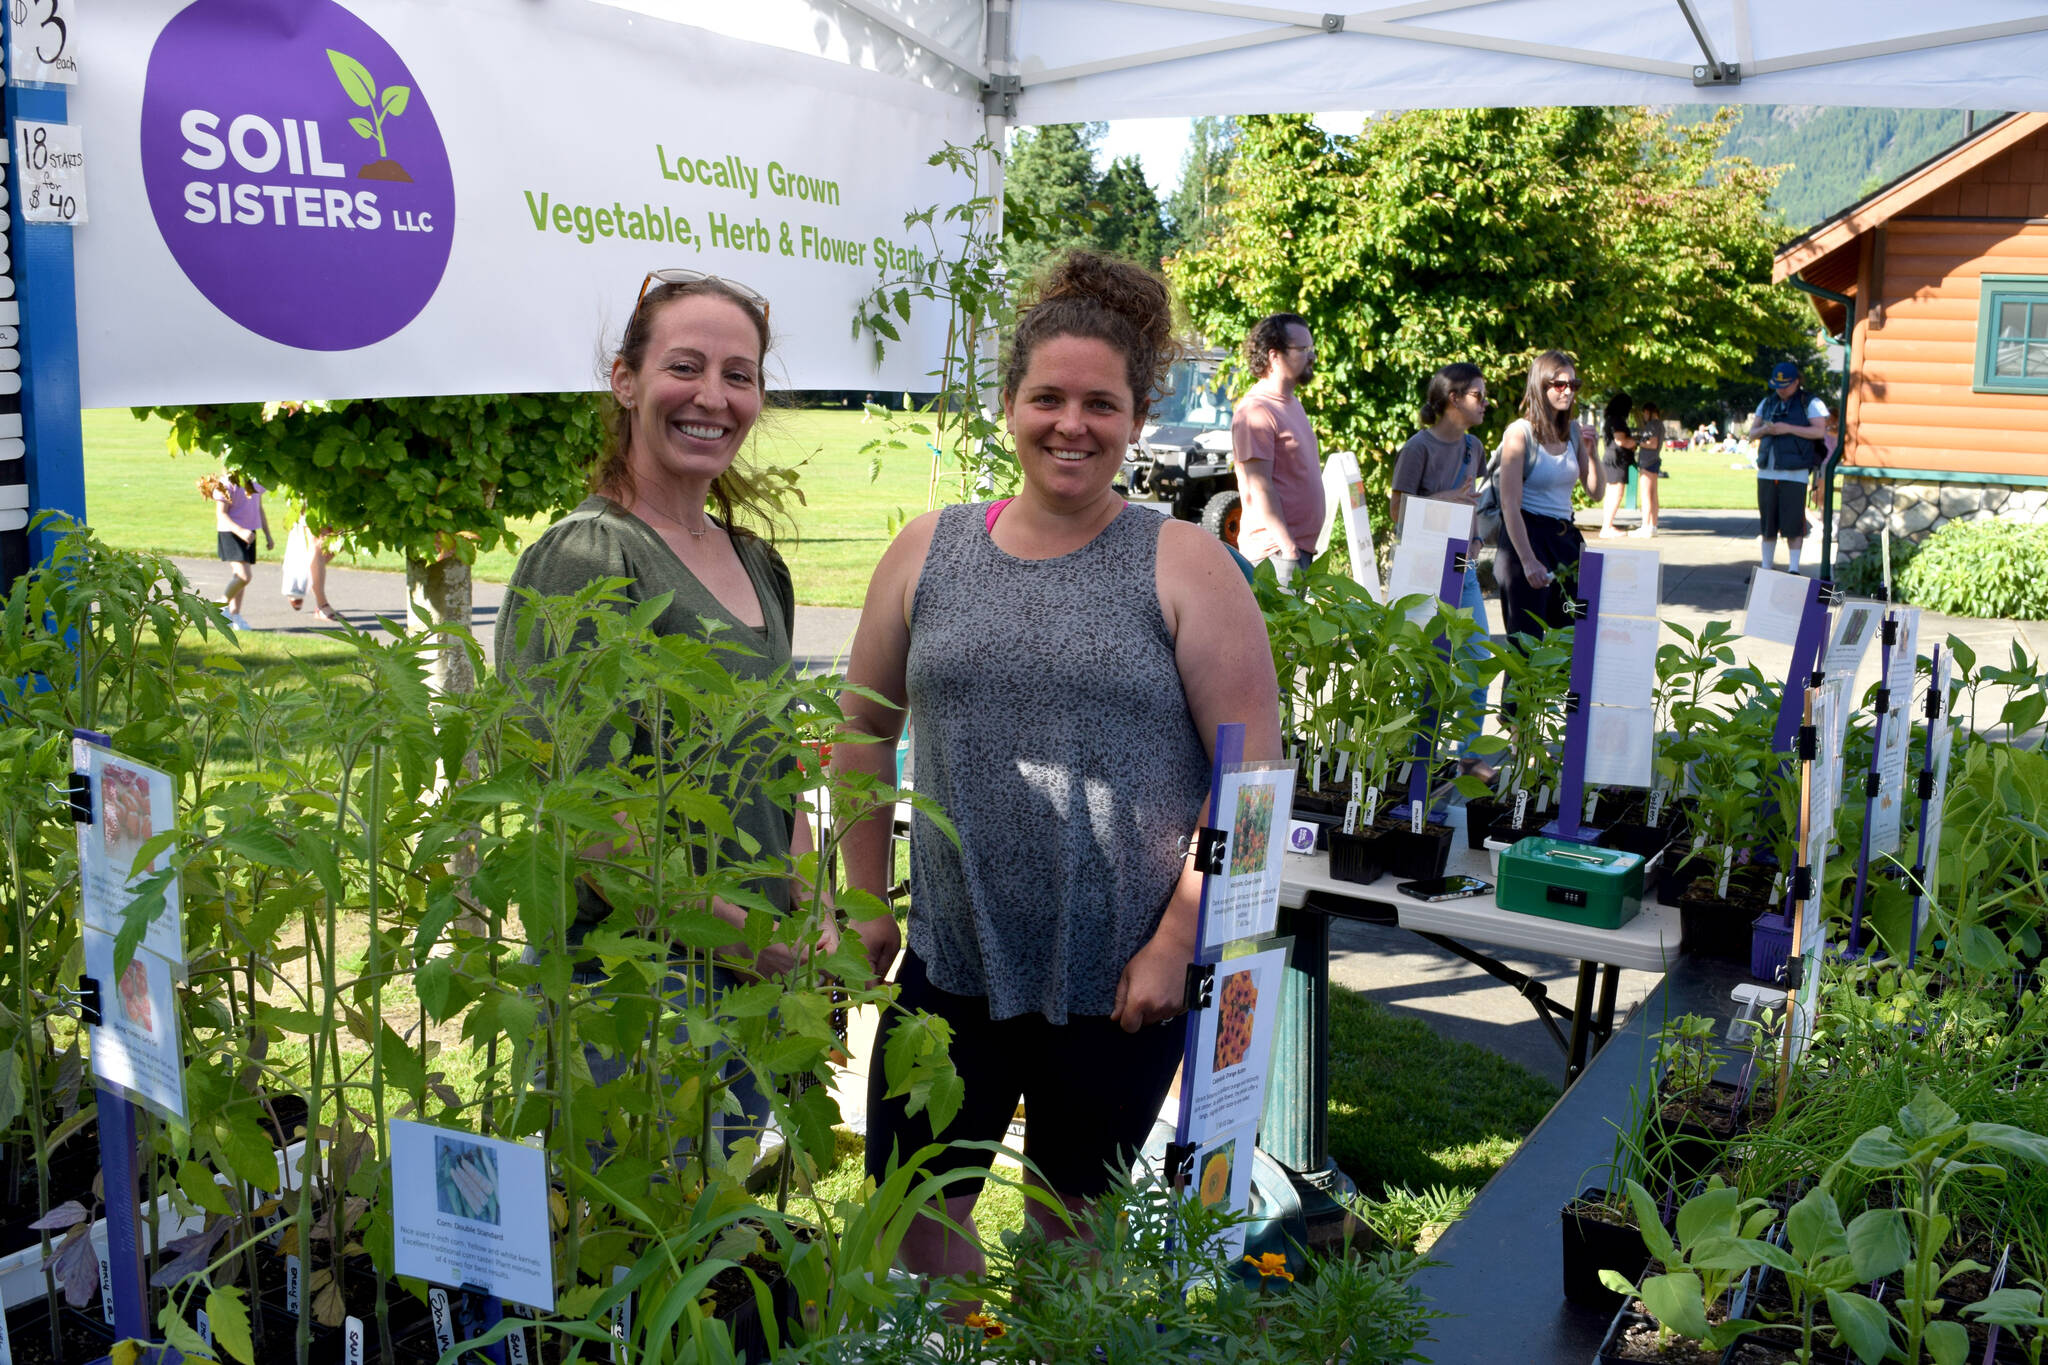 Fall City’s Soil Sisters pose at the North Bend Farmer’s Market on June 23. All photos by Conor Wilson/Valley Record.